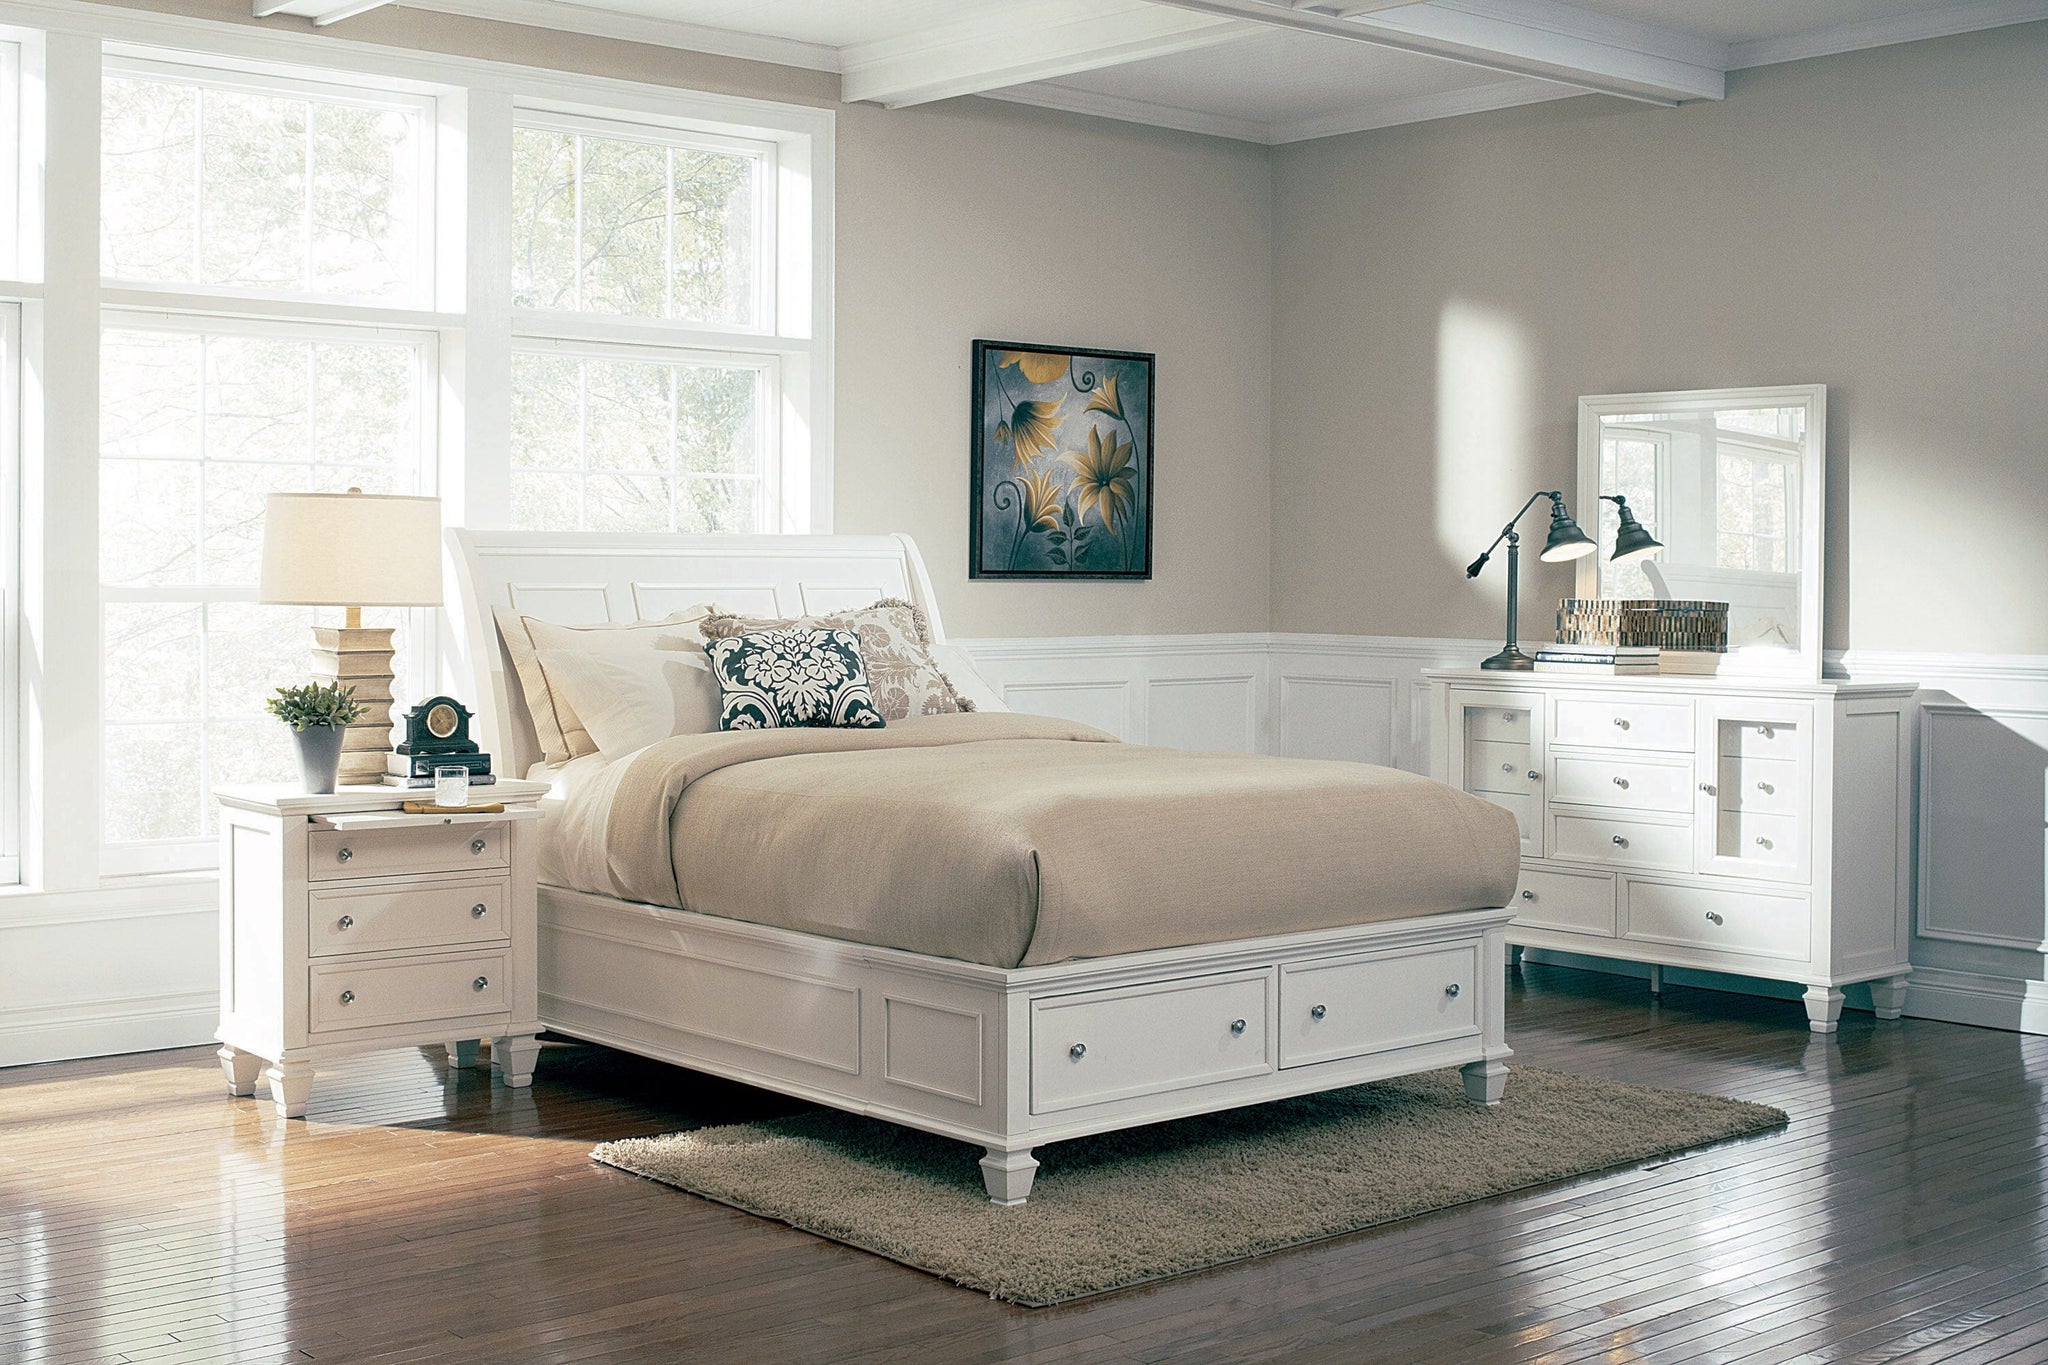 Sandy Beach Eastern King Storage Sleigh Bed White Collection: This Bed Is Constructed From Tropical Hardwoods And Veneer For Dependability And Durability, Also A Classy White Finish, Can Be Showcased In Any Master Bedroom.  SKU: 201309KE